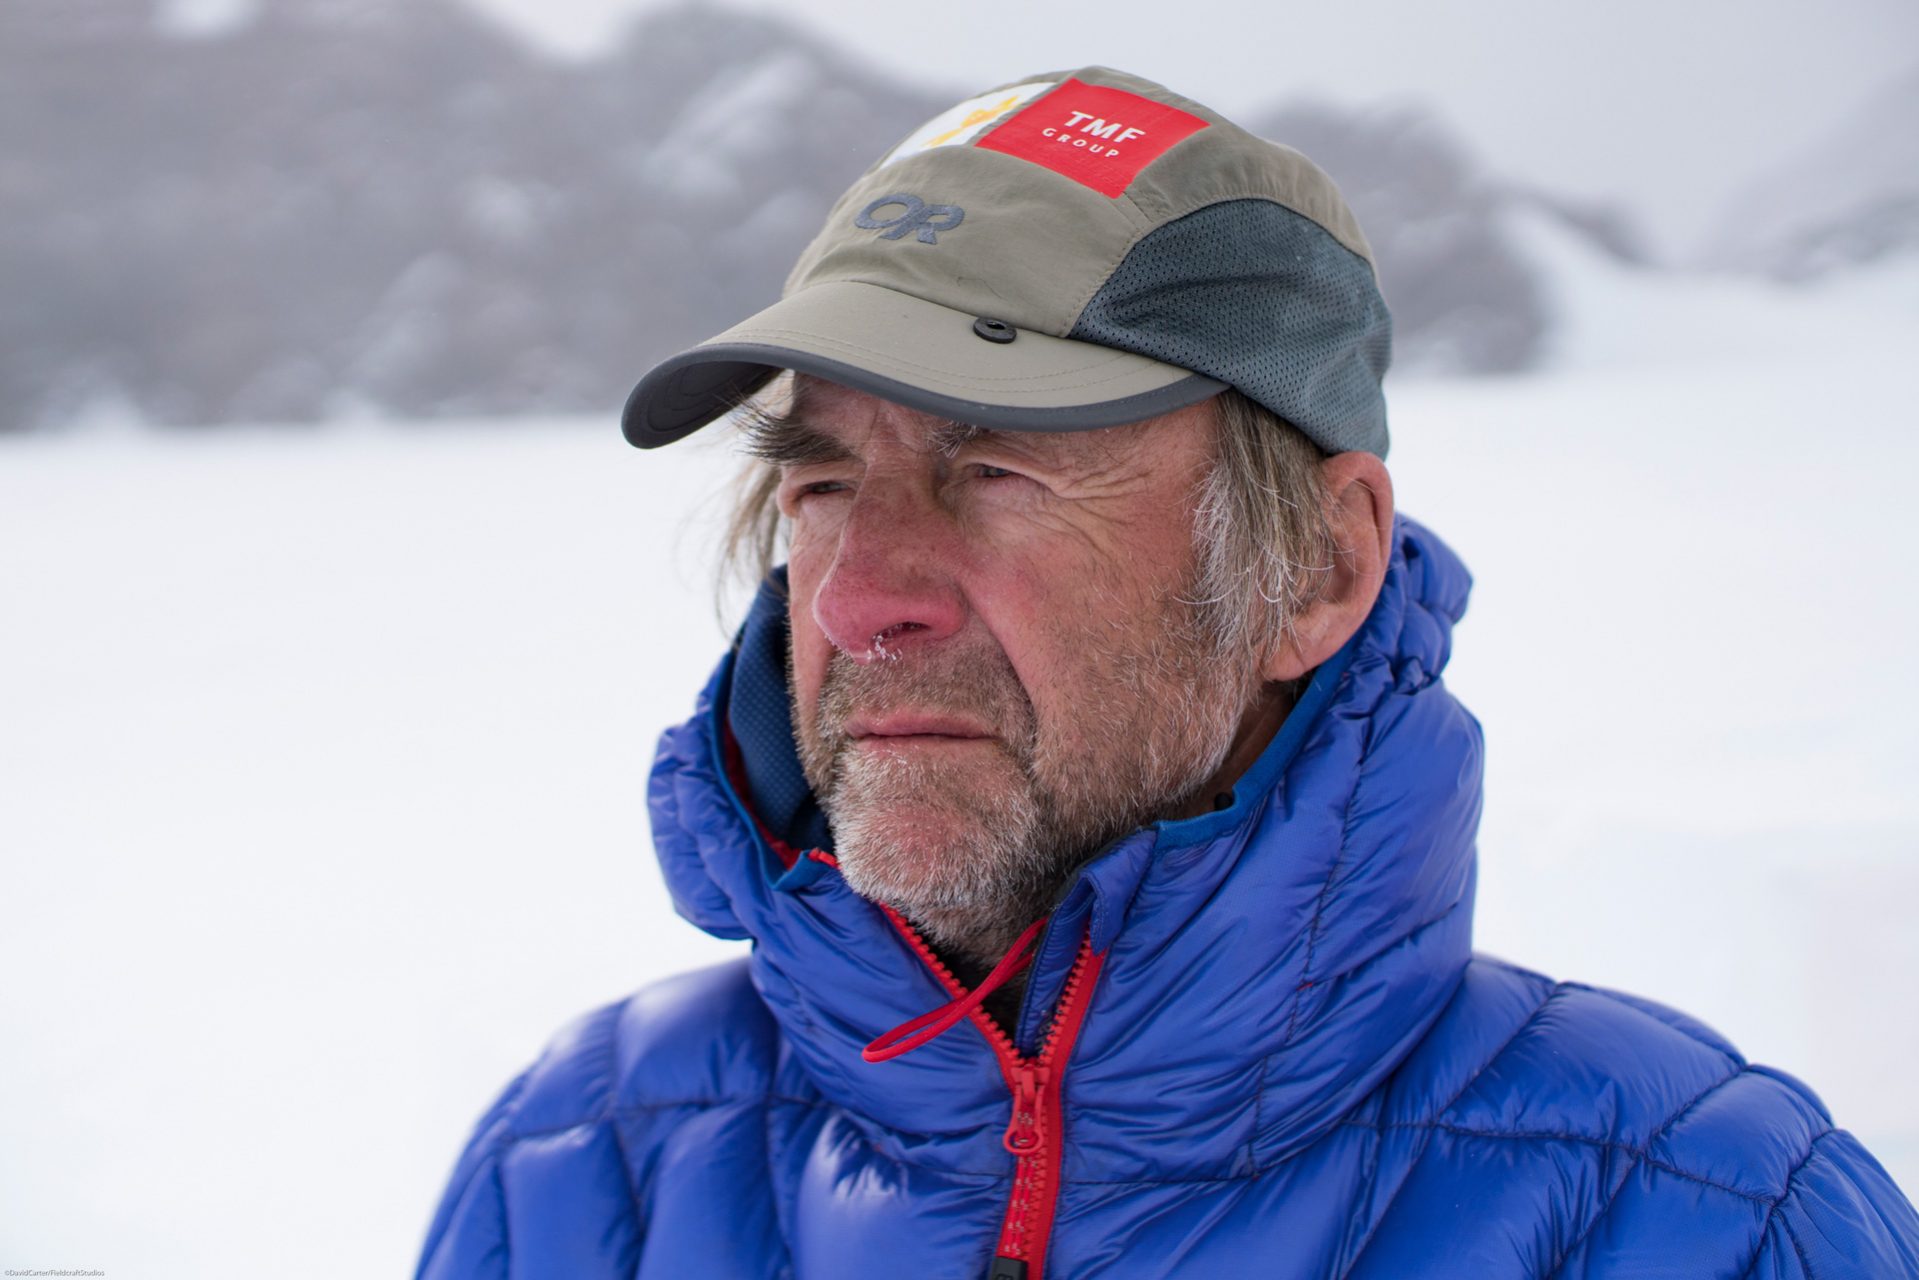 Filming with Ranulph Fiennes in Antarctica - just before climb of Mount Vinson